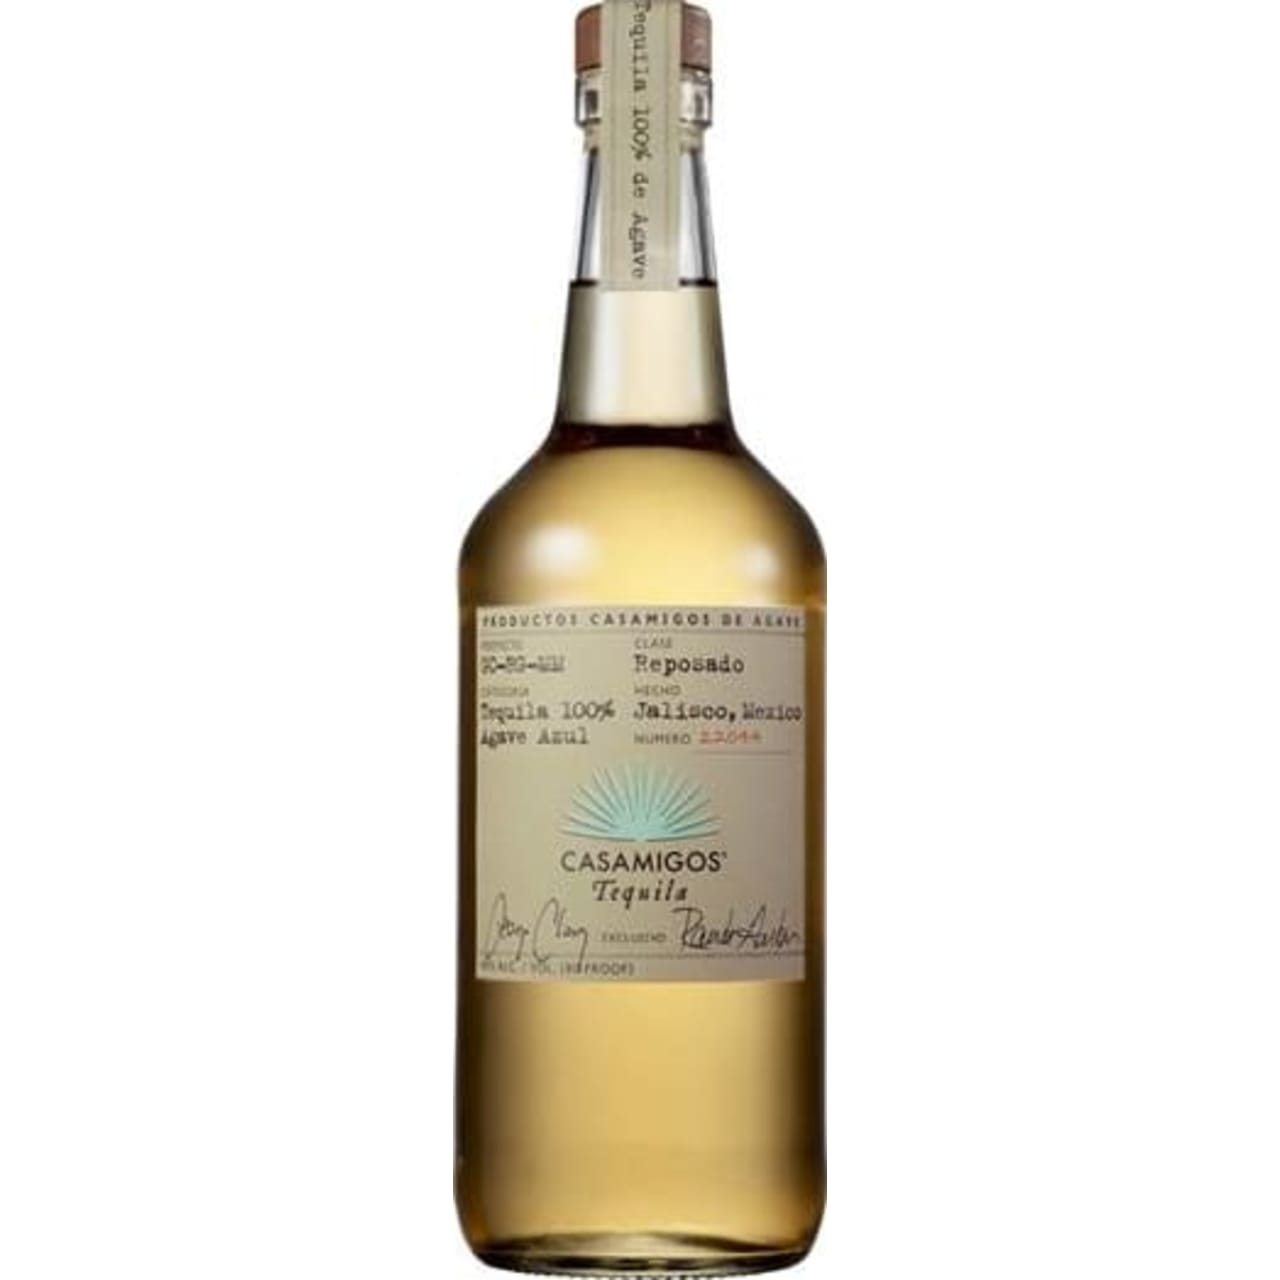 Soft, slightly oaky with hints of caramel and cocoa. Casamigos has a silky texture with a medium to long smooth finish.